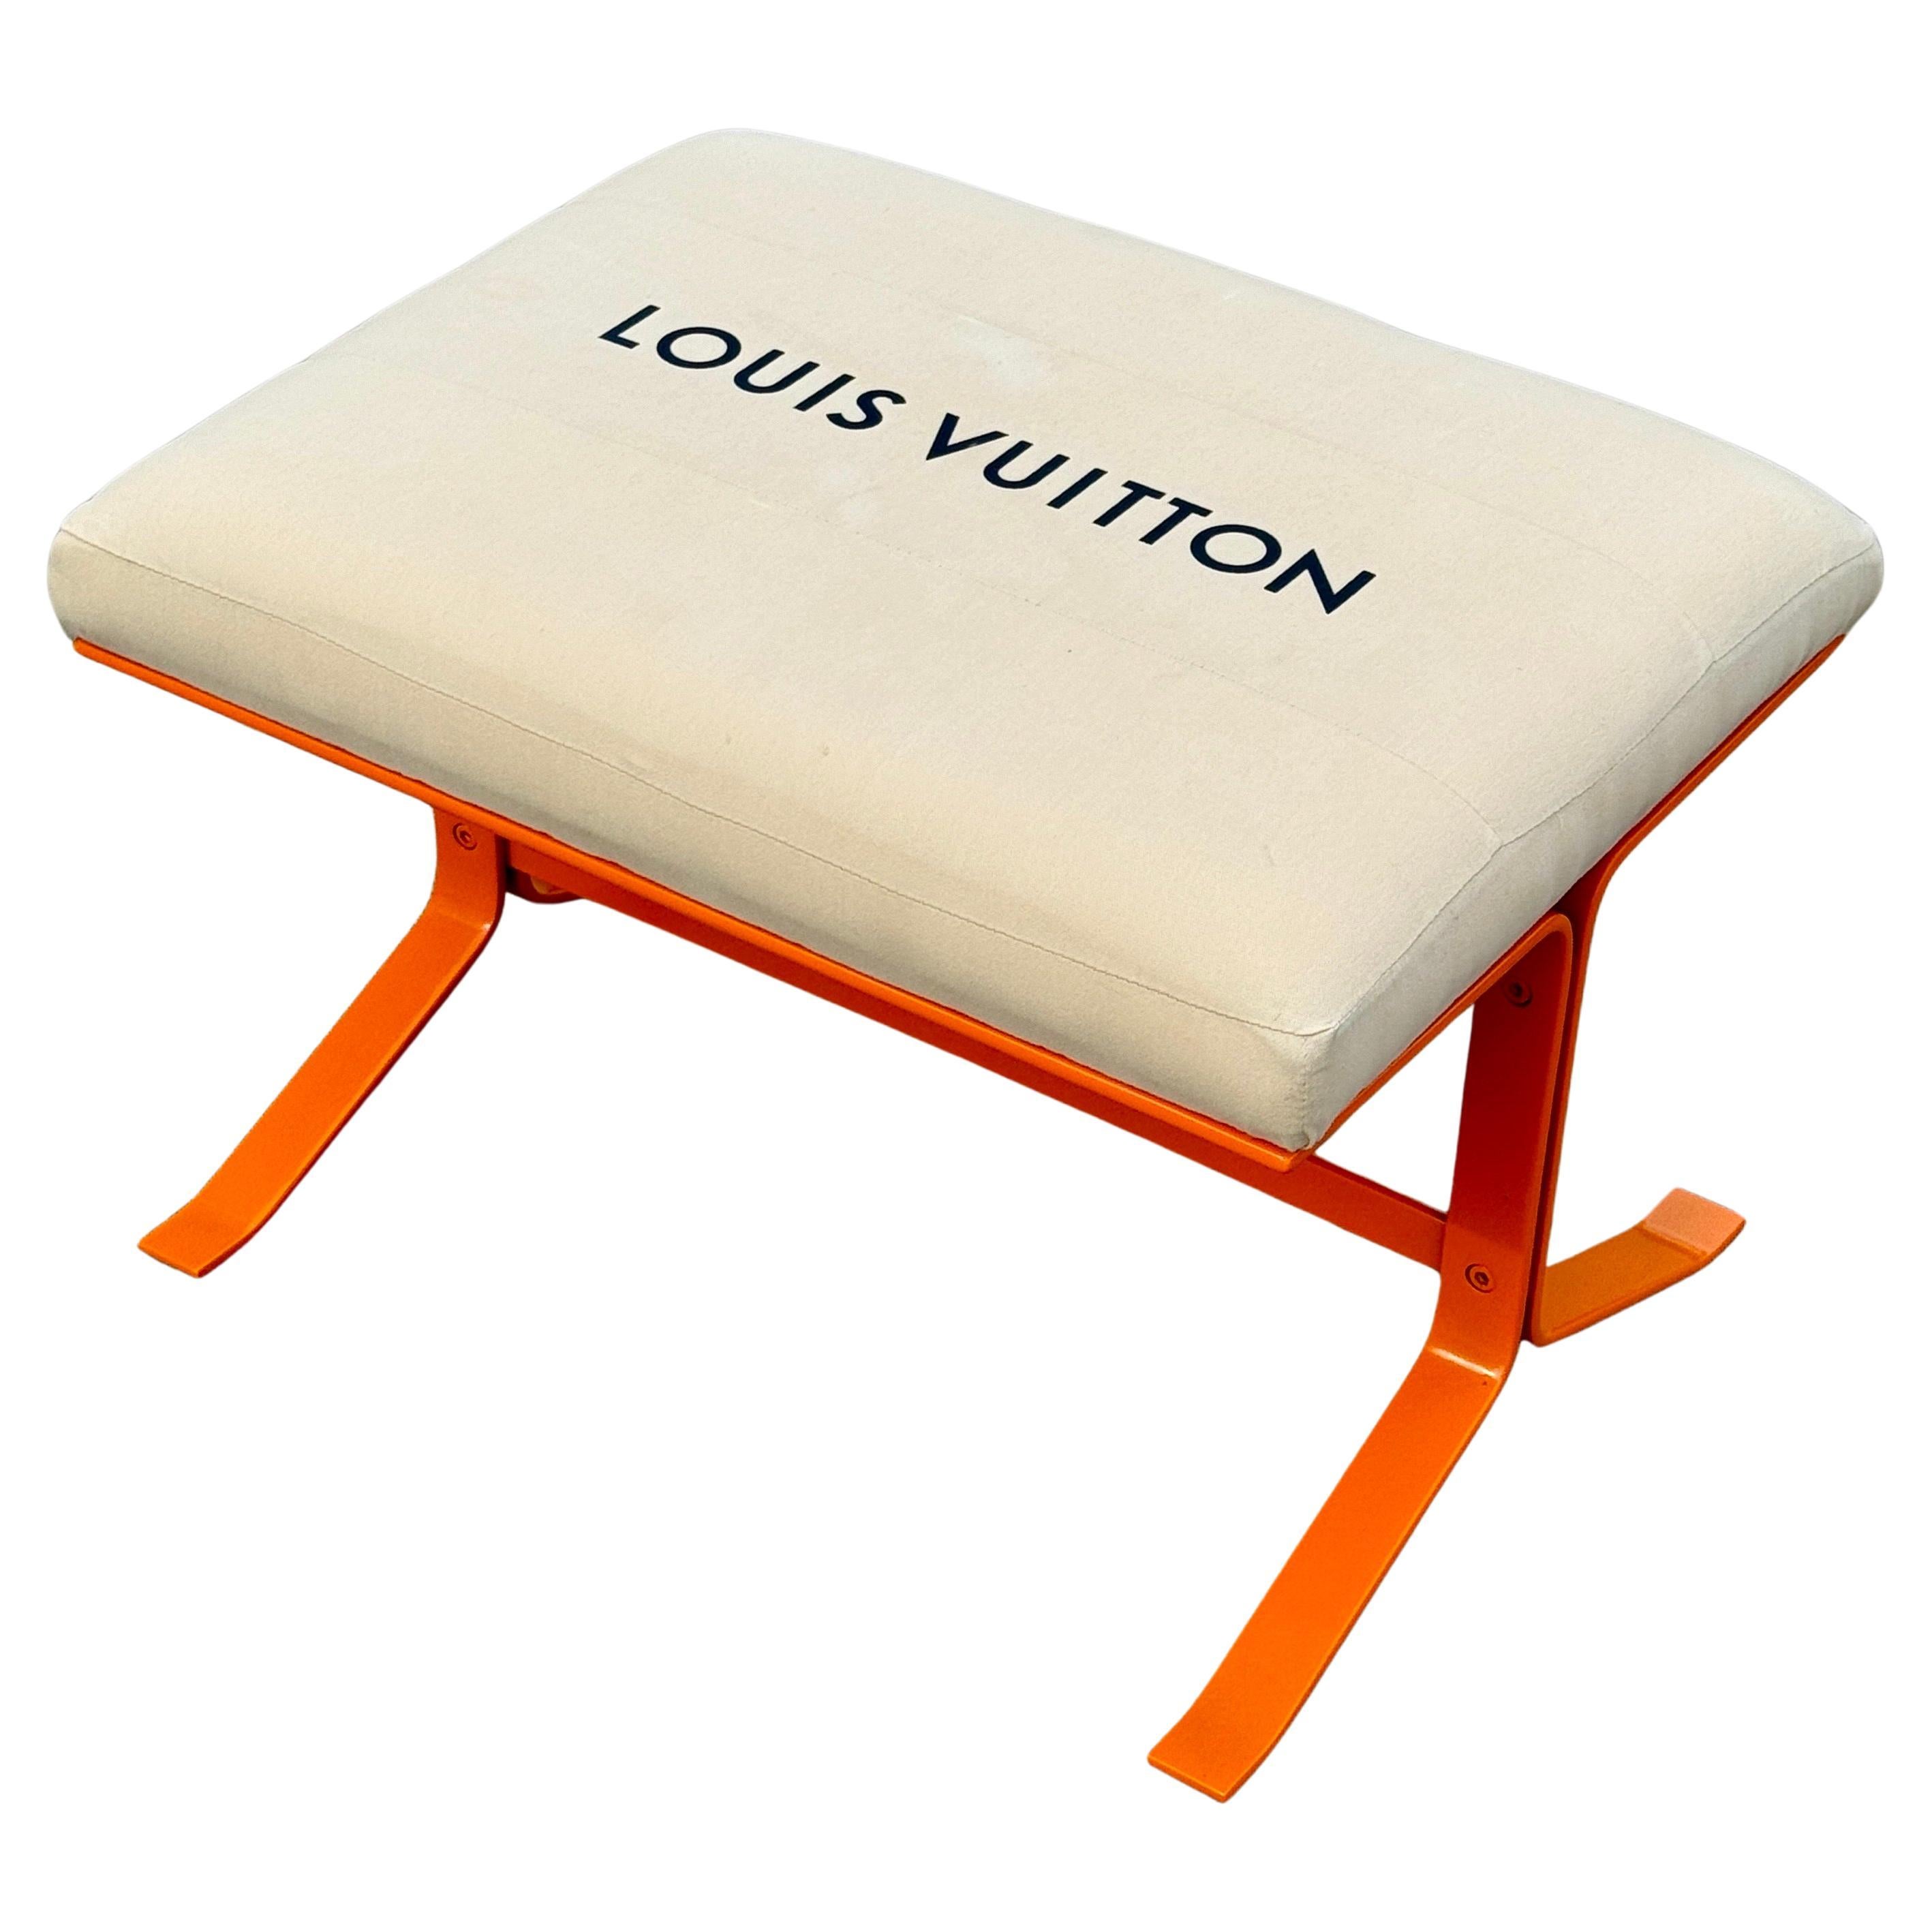 Orange Upholstered Bench With Louis Vuitton Bag Fabric For Sale